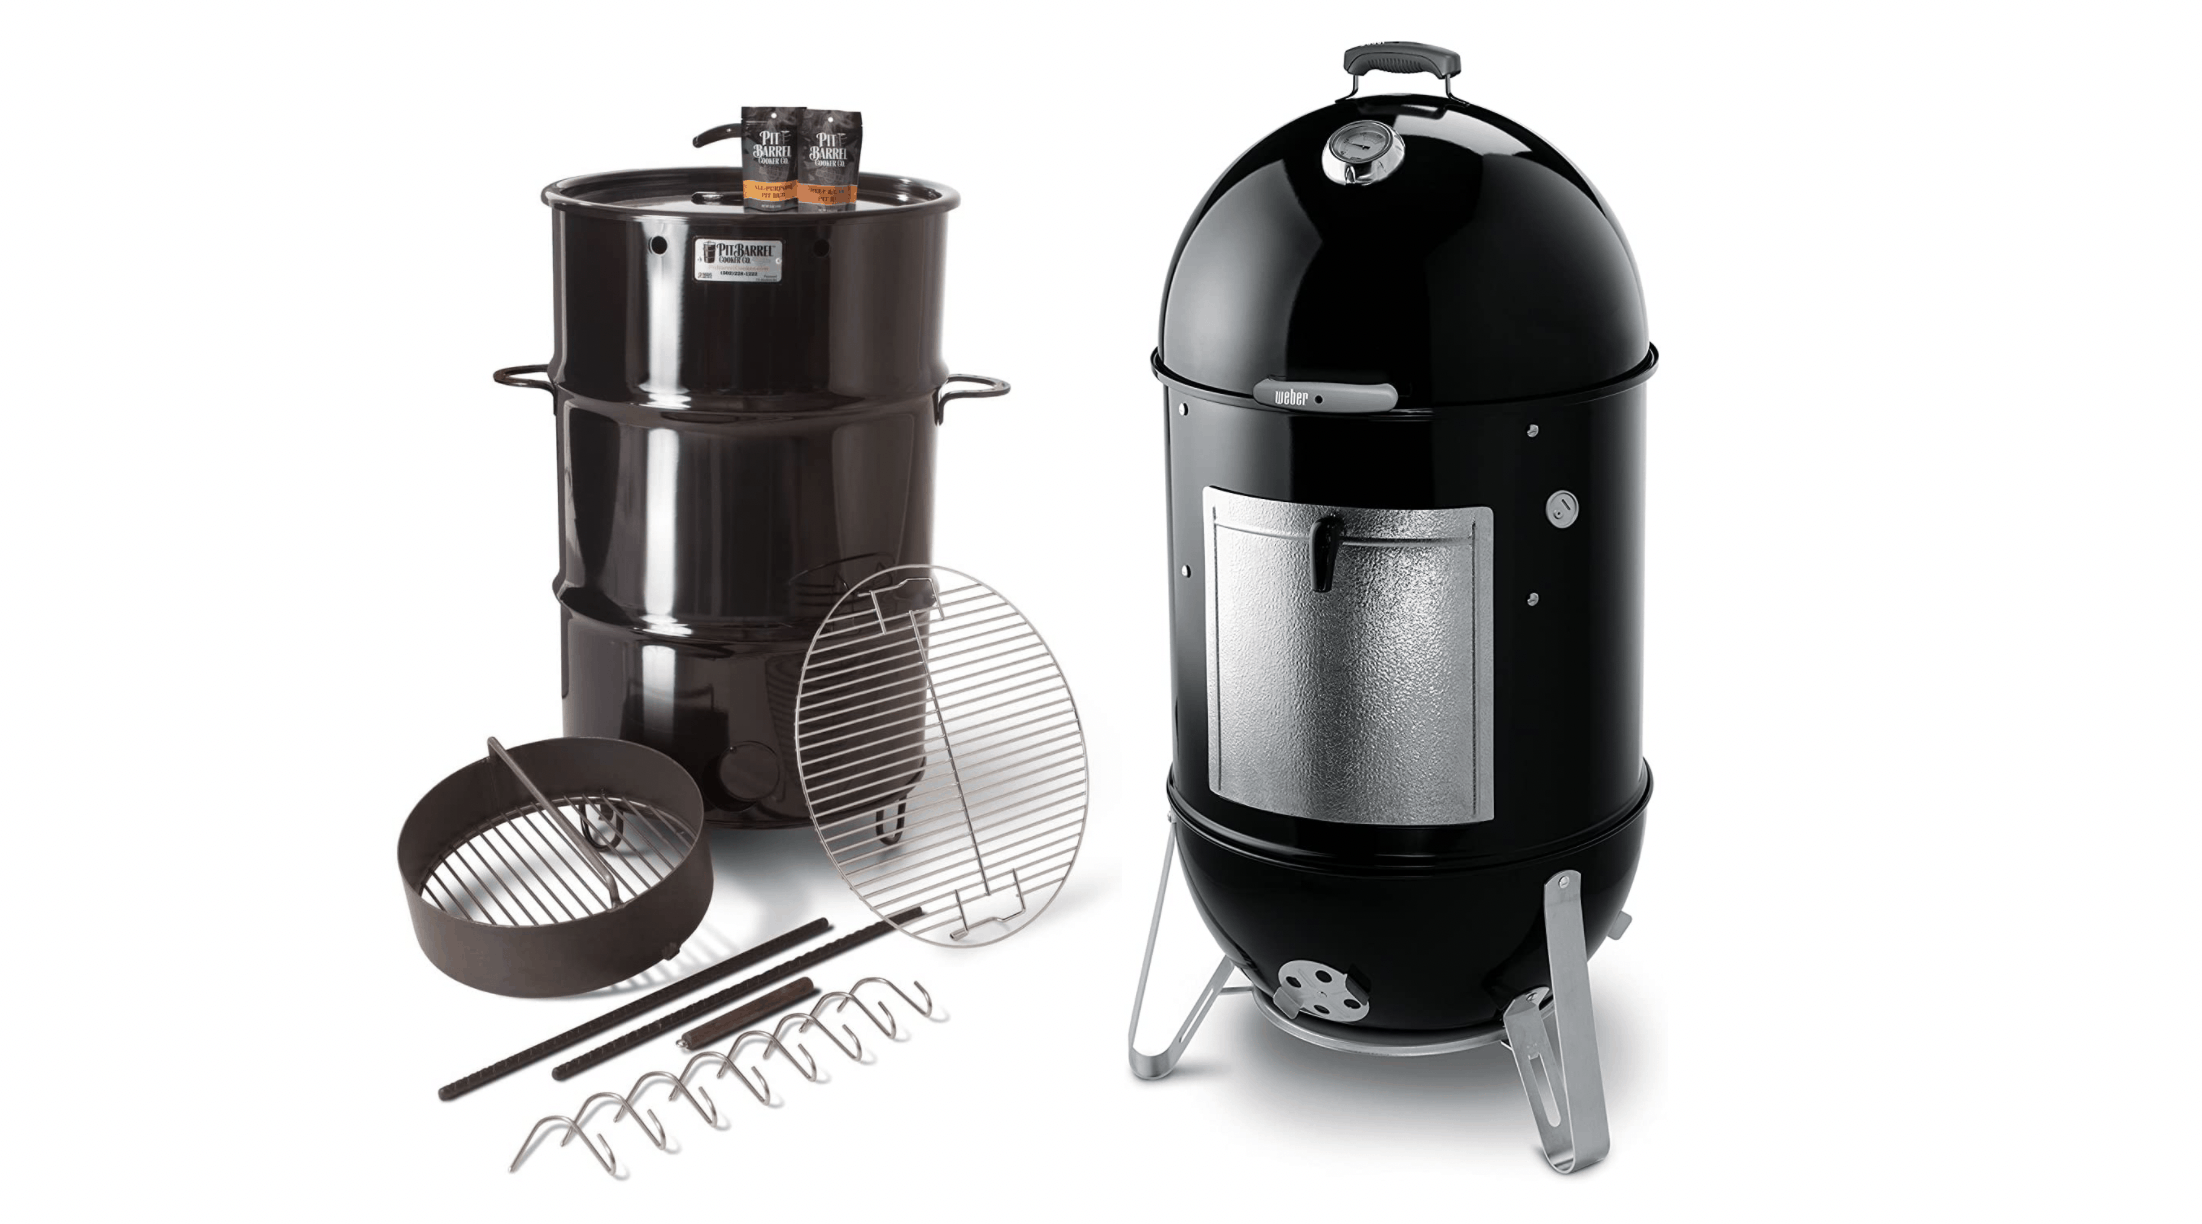 Pit Barrel Cooker vs Weber Smokey Mountain | Comparing two great smokers